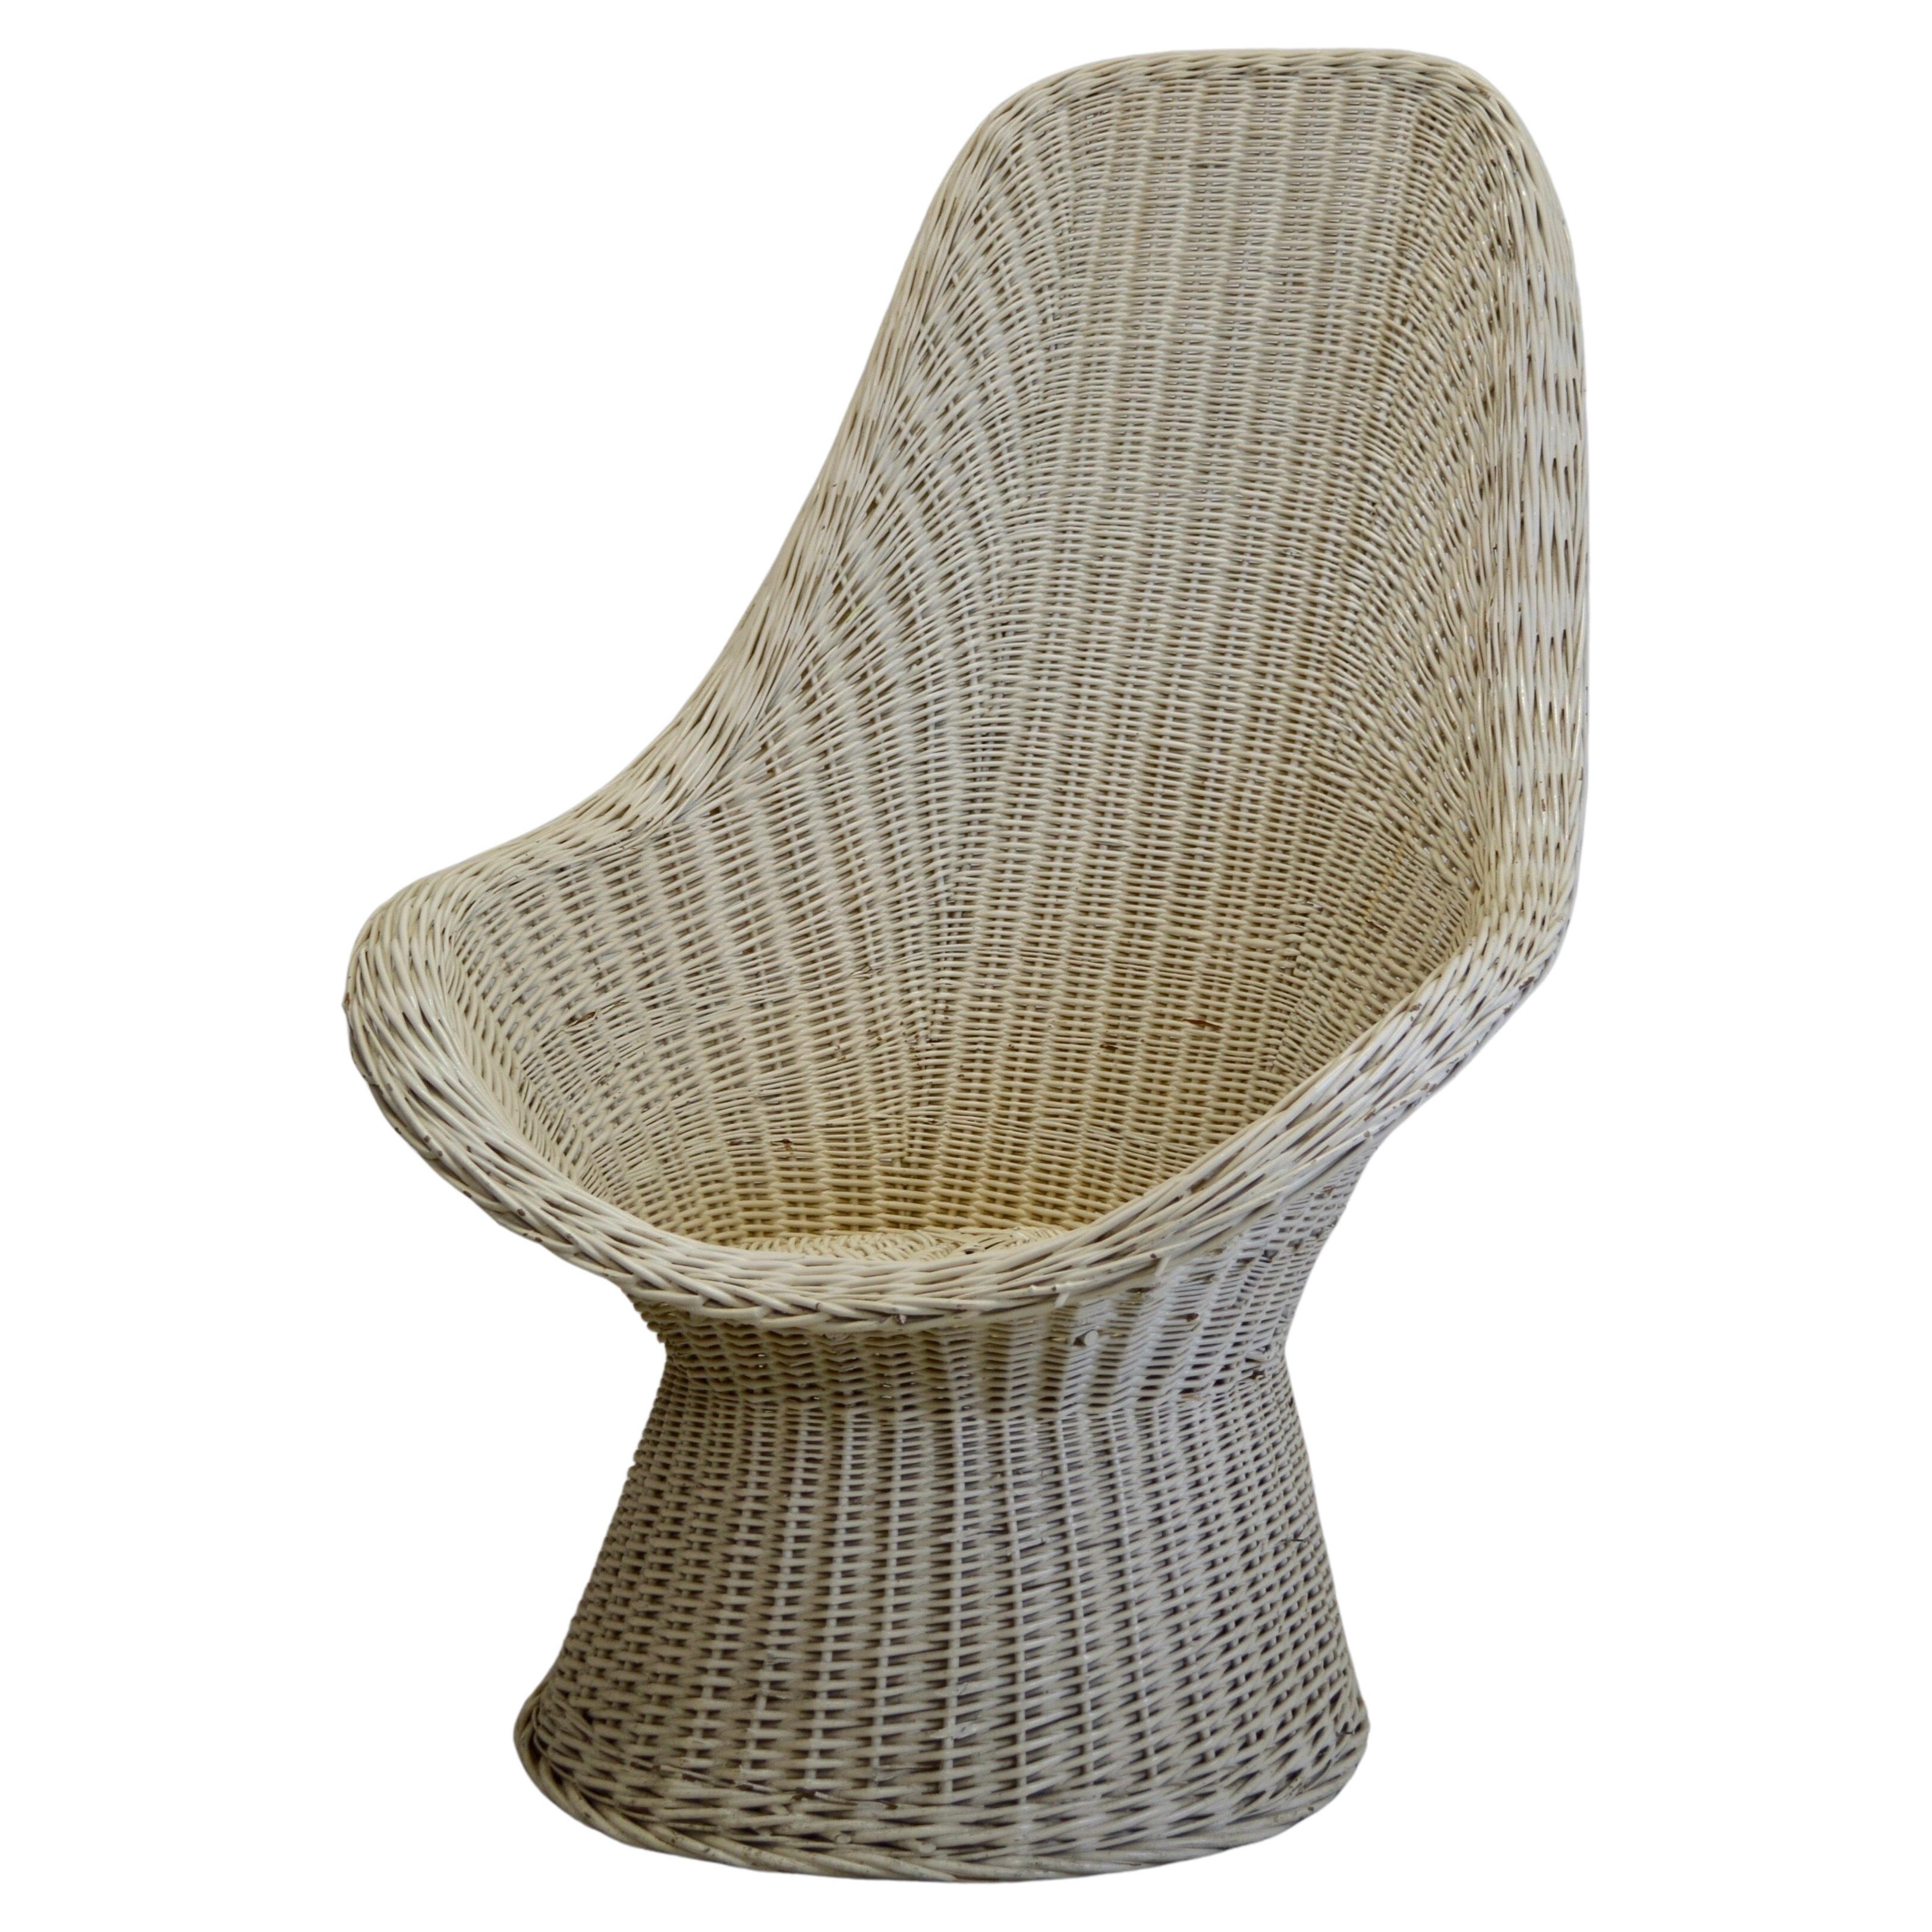 A woven rattan armchair, white lacquered - France - 1960. For Sale